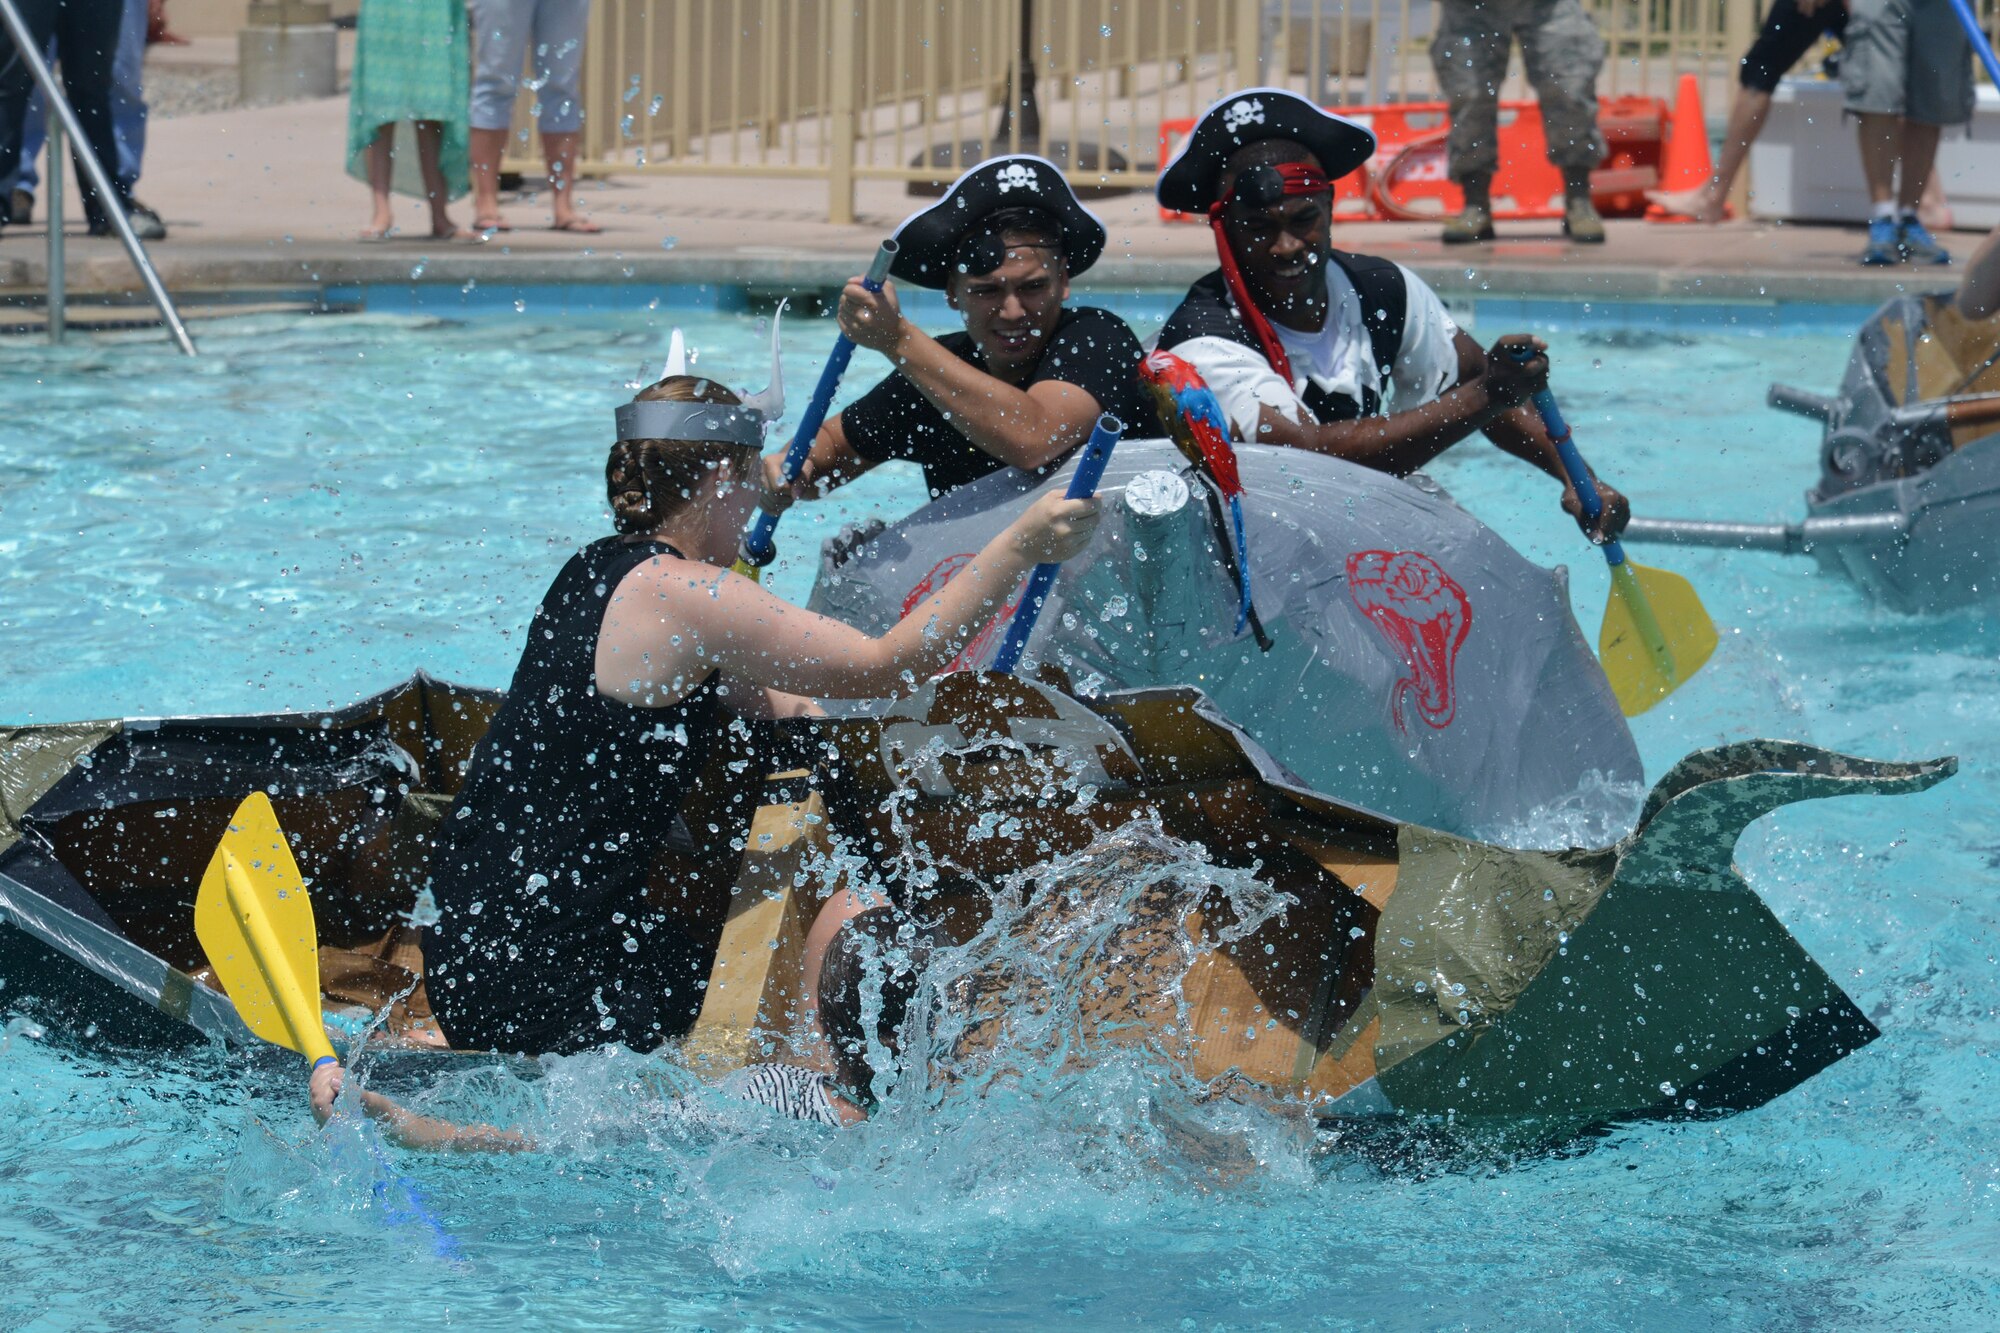 Eighteen teams competed in Kirtland's annual Battle of the Battleships Aug. 7 at the Mountain View Club pool. Teams raced boats made only of cardboard and duct tape. (Photo by Ken Moore)